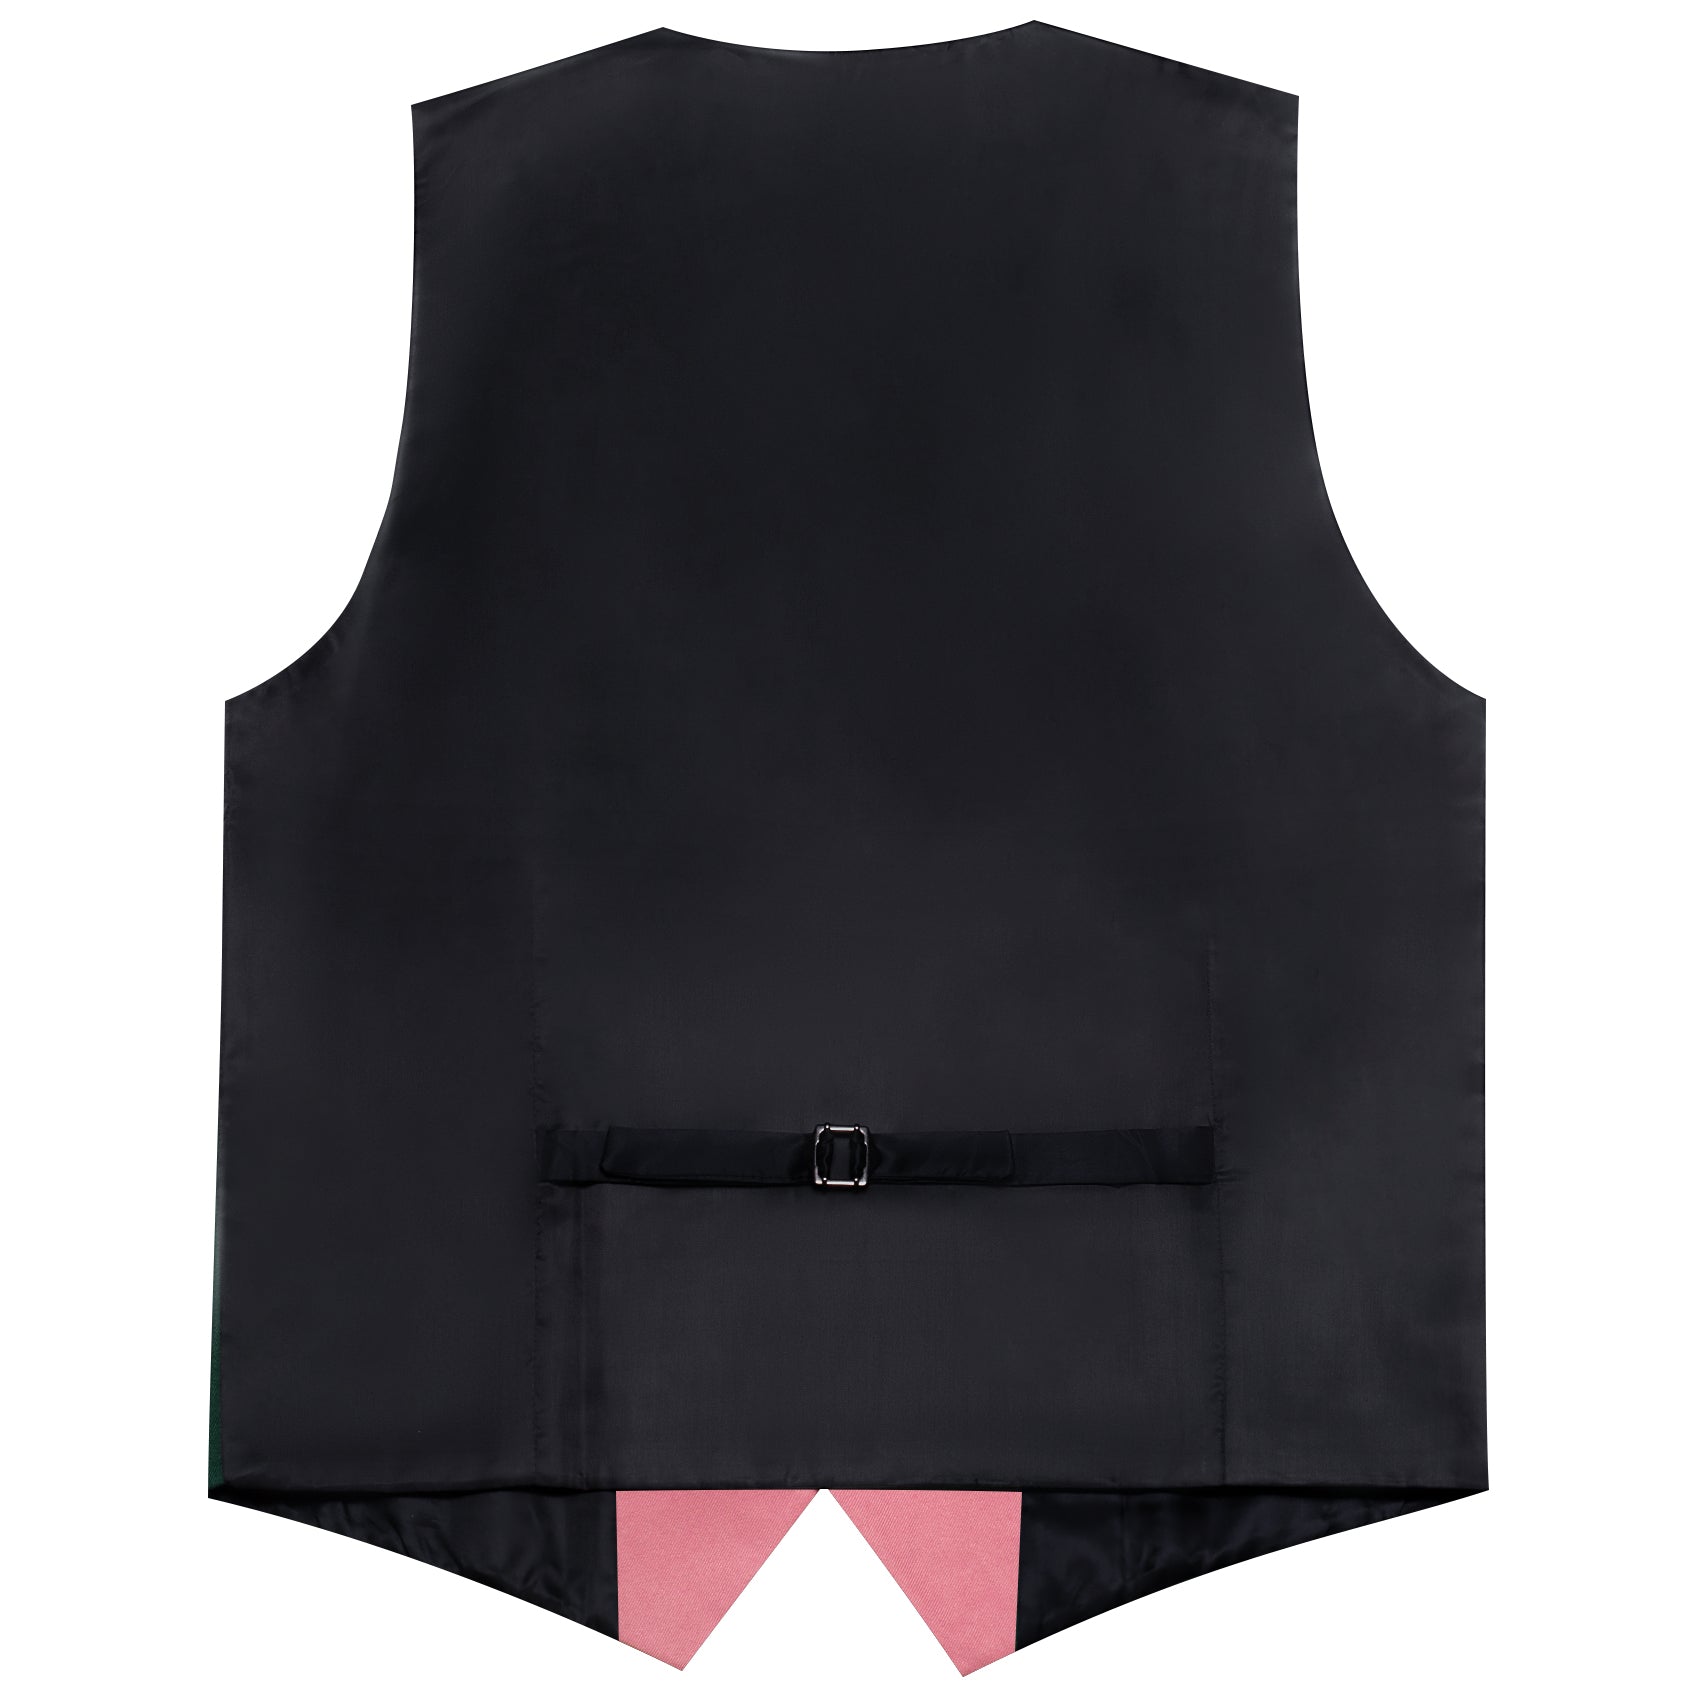 Barry.wang Pale Red Solid Vest Waistcoat Set